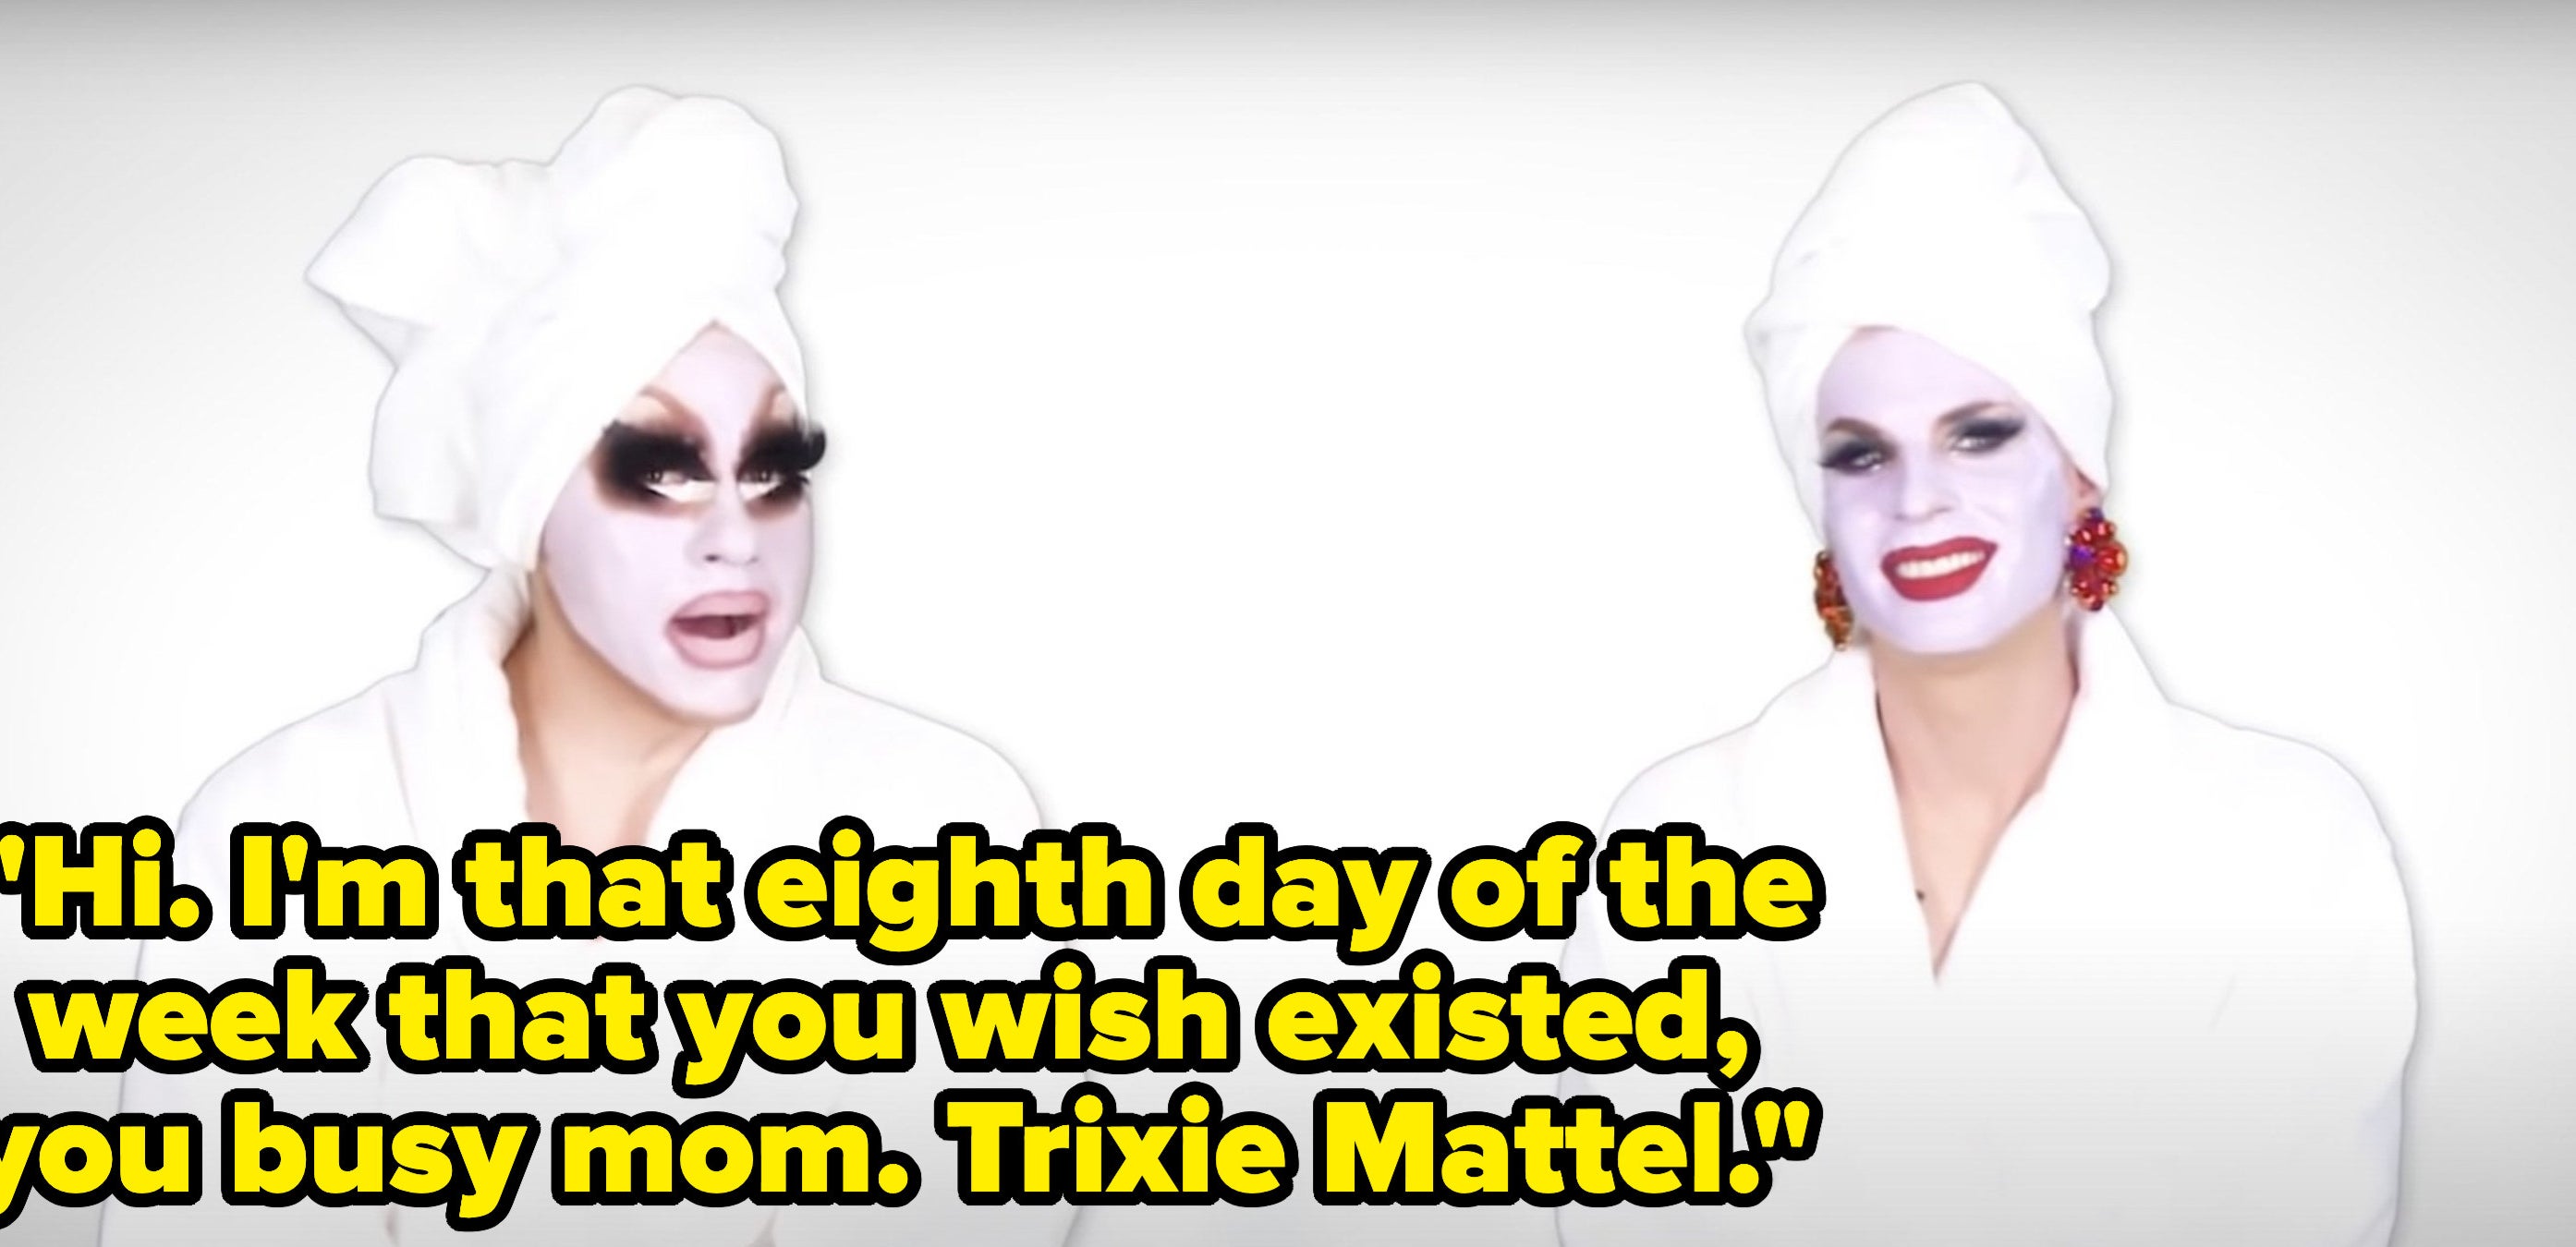 Trixie says, &quot;Hi, Im that eighth day of the week that you wish existed, you busy mom, Trixie Mattel